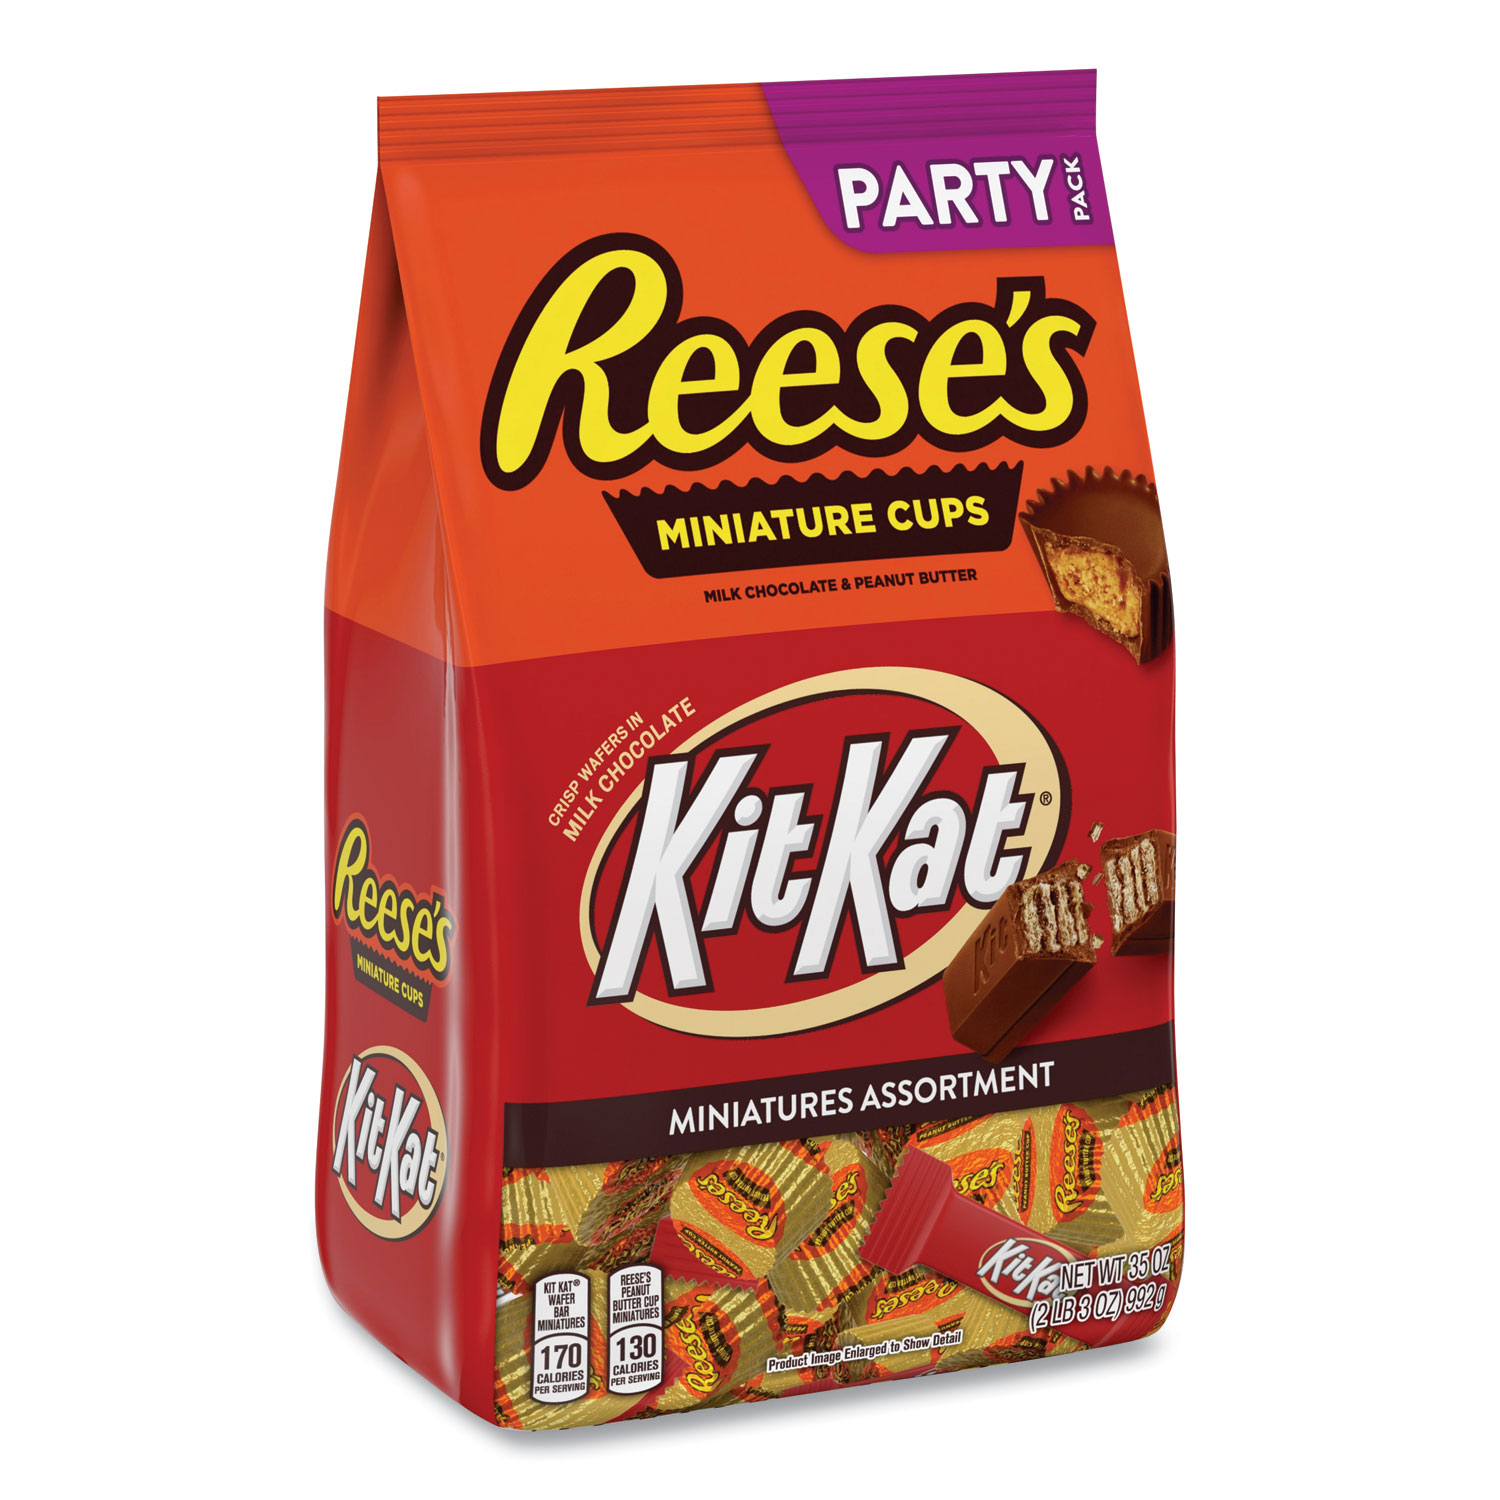  National Brand 99983 Party Pack Milk Chocolate Candy Assortment, Kit Kat/Reese's Peanut Butter Cups, 35 oz Bag, Free Delivery in 1-4 Business Days (GRR24600401) 